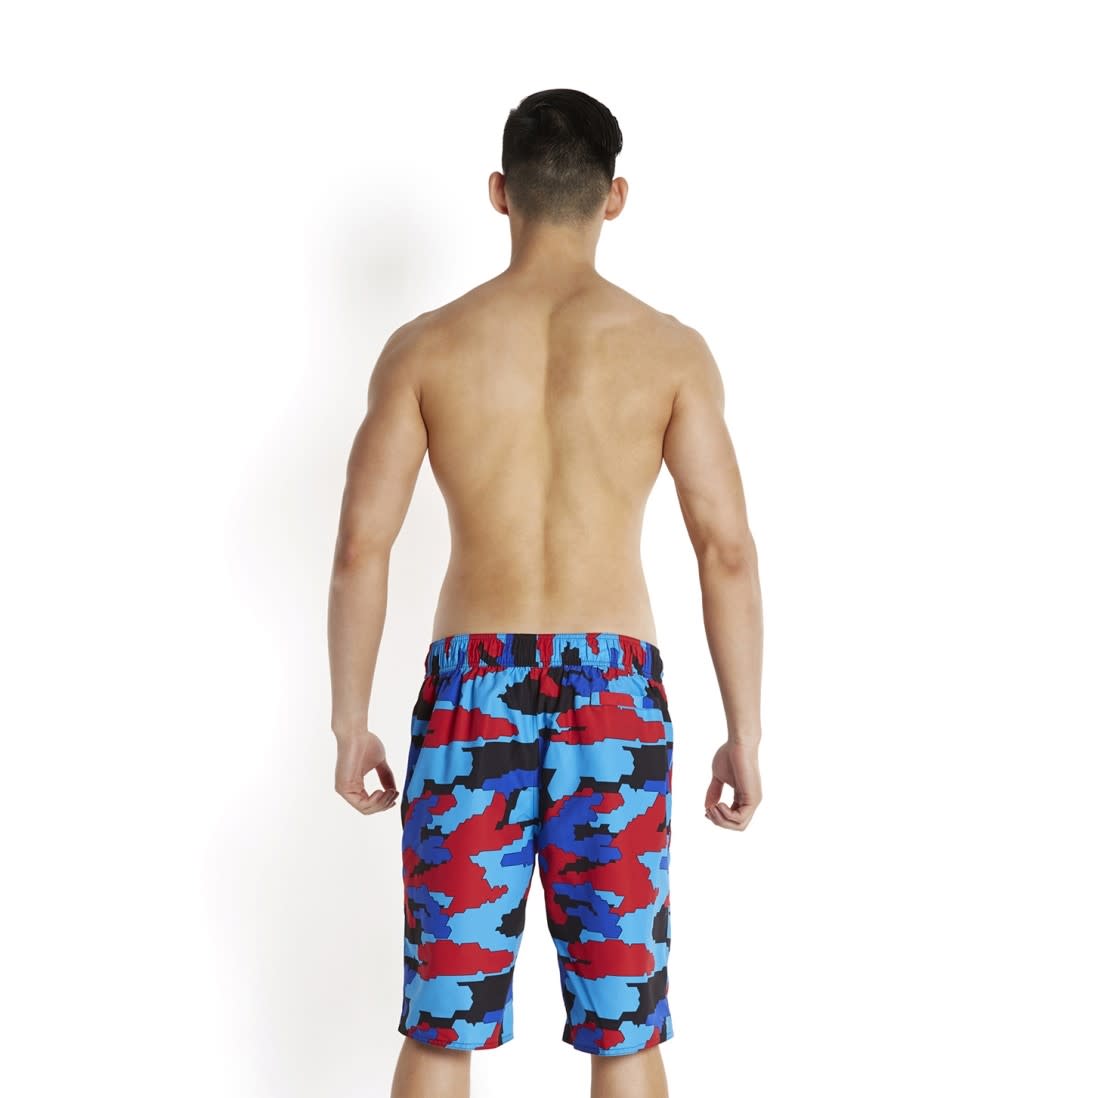 X-Small Speedo Mens Printed Leisure 18-Inch Swimsuit-Camouflage Black/Oxide Grey 